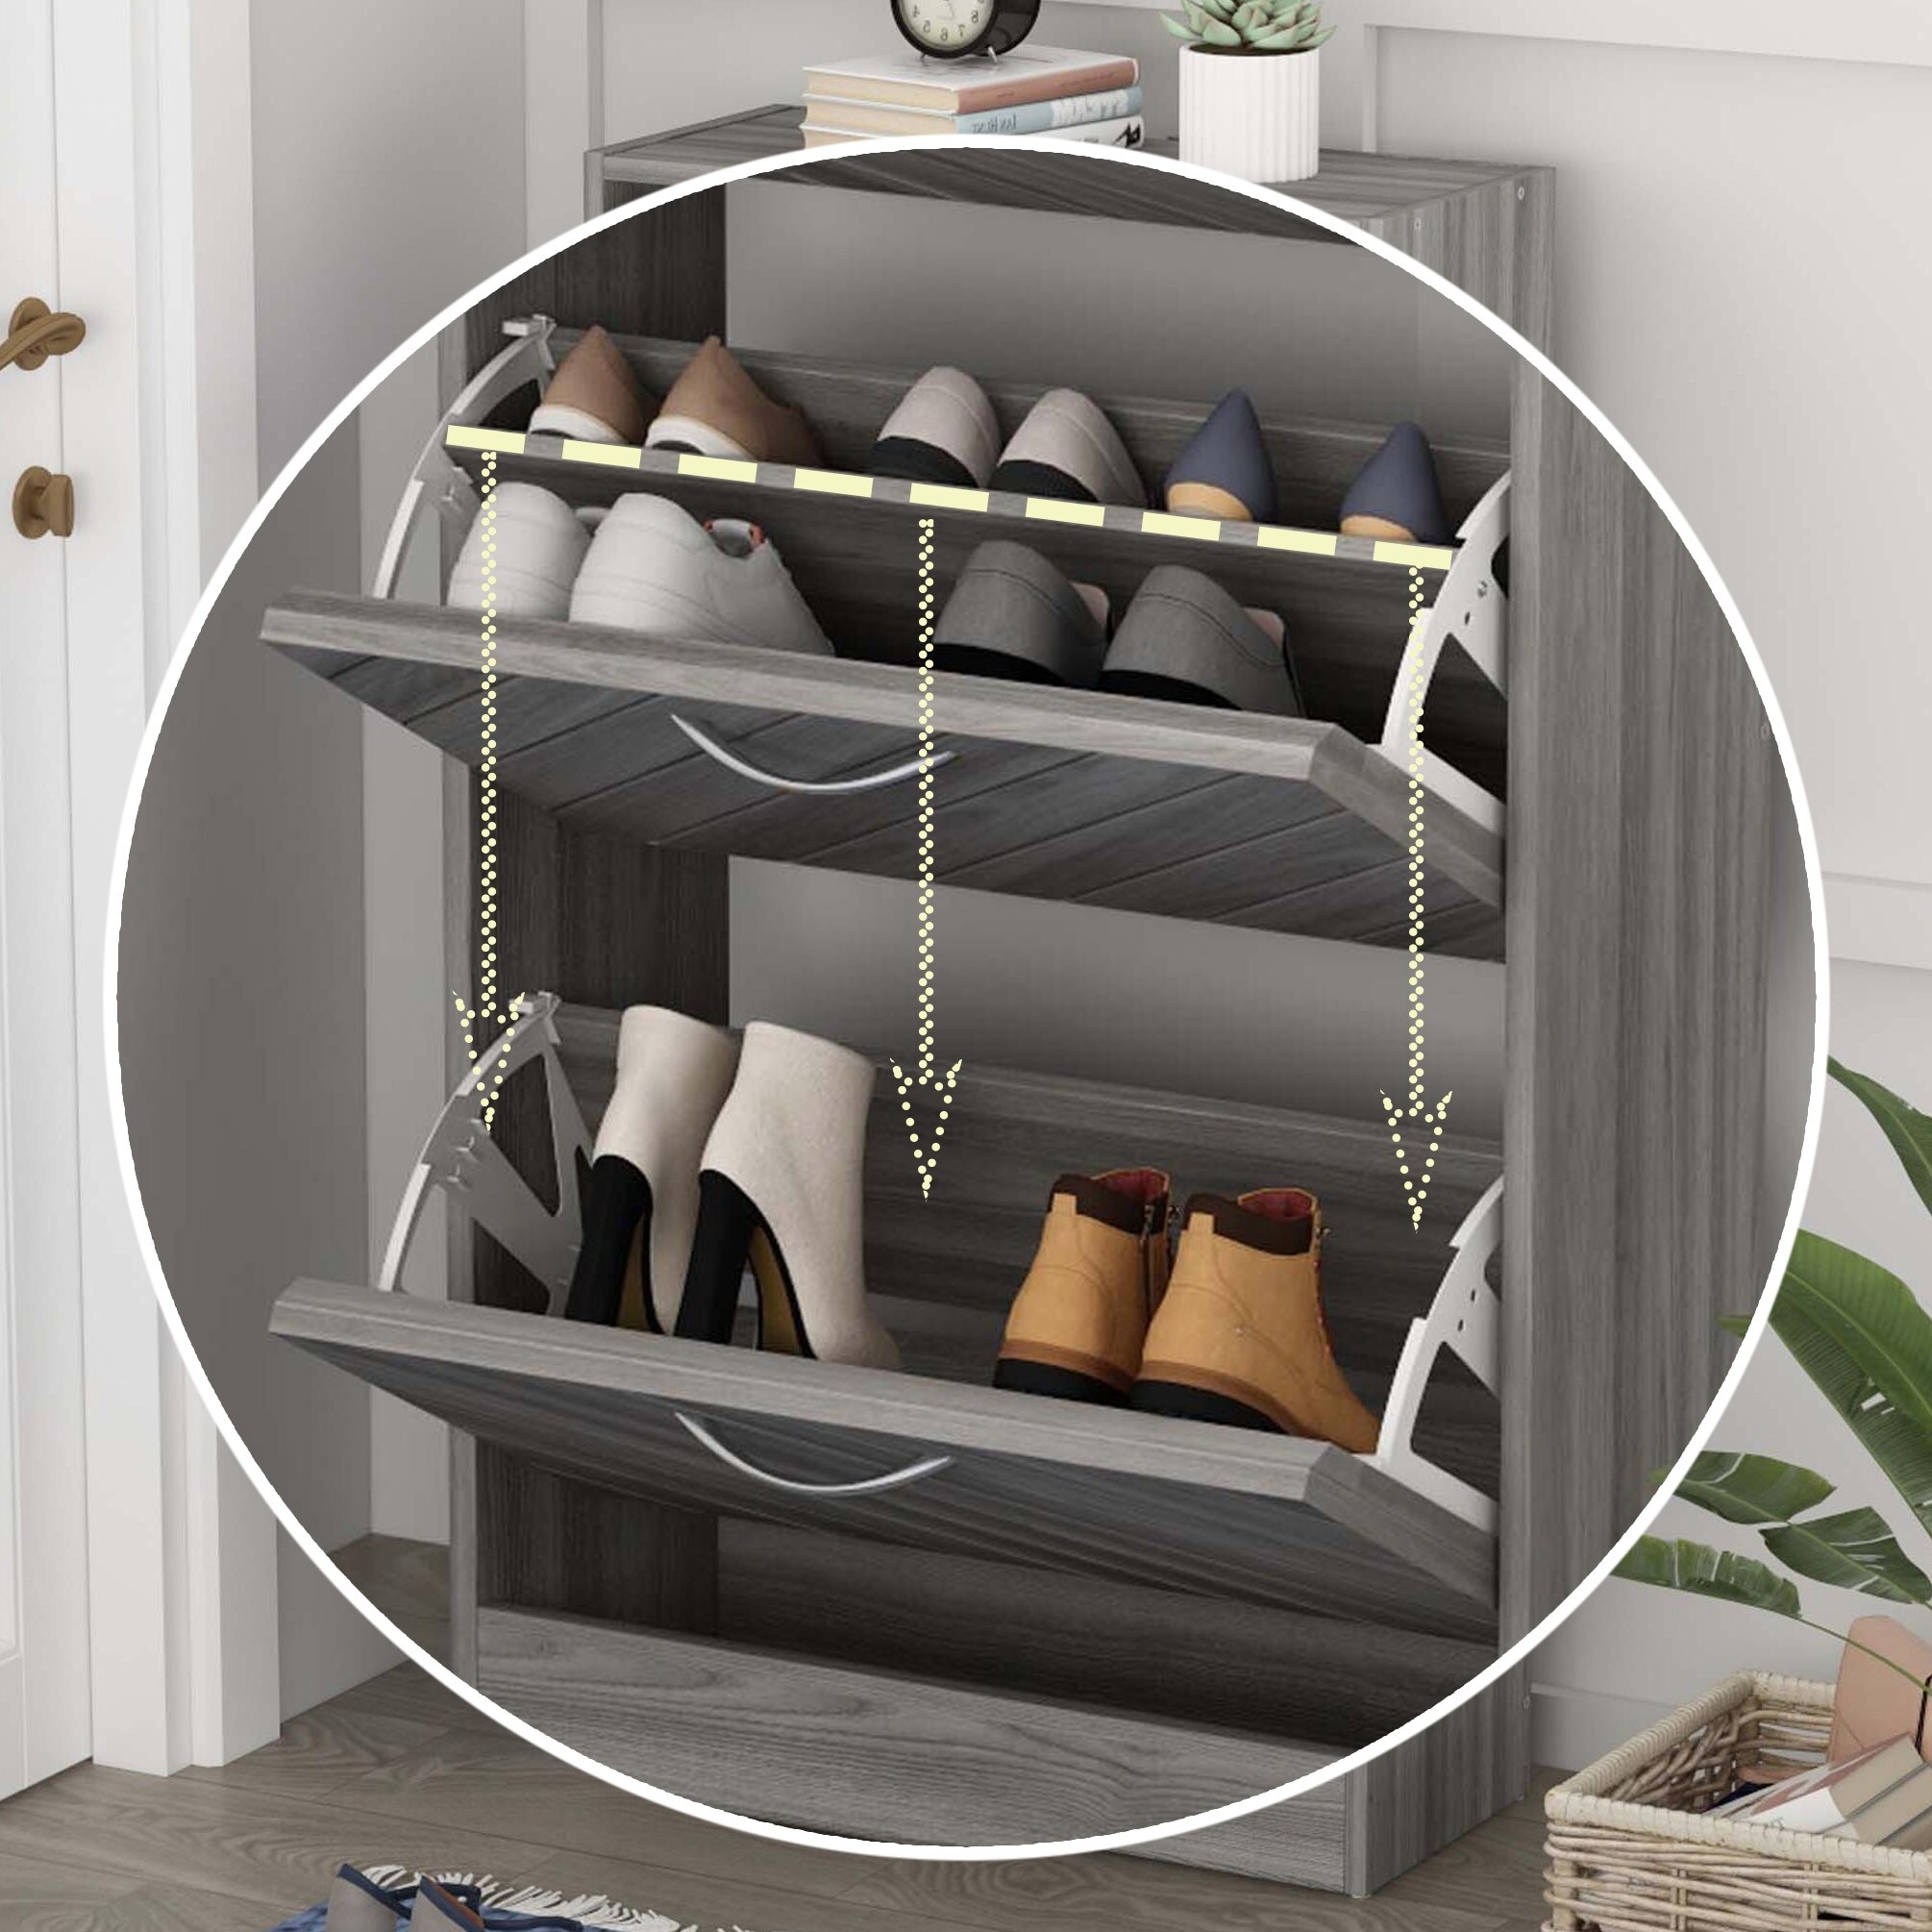 FUFU&GAGA 42.3 in. H x 22.4 in. W Gray Shoe Storage Cabinet with 3